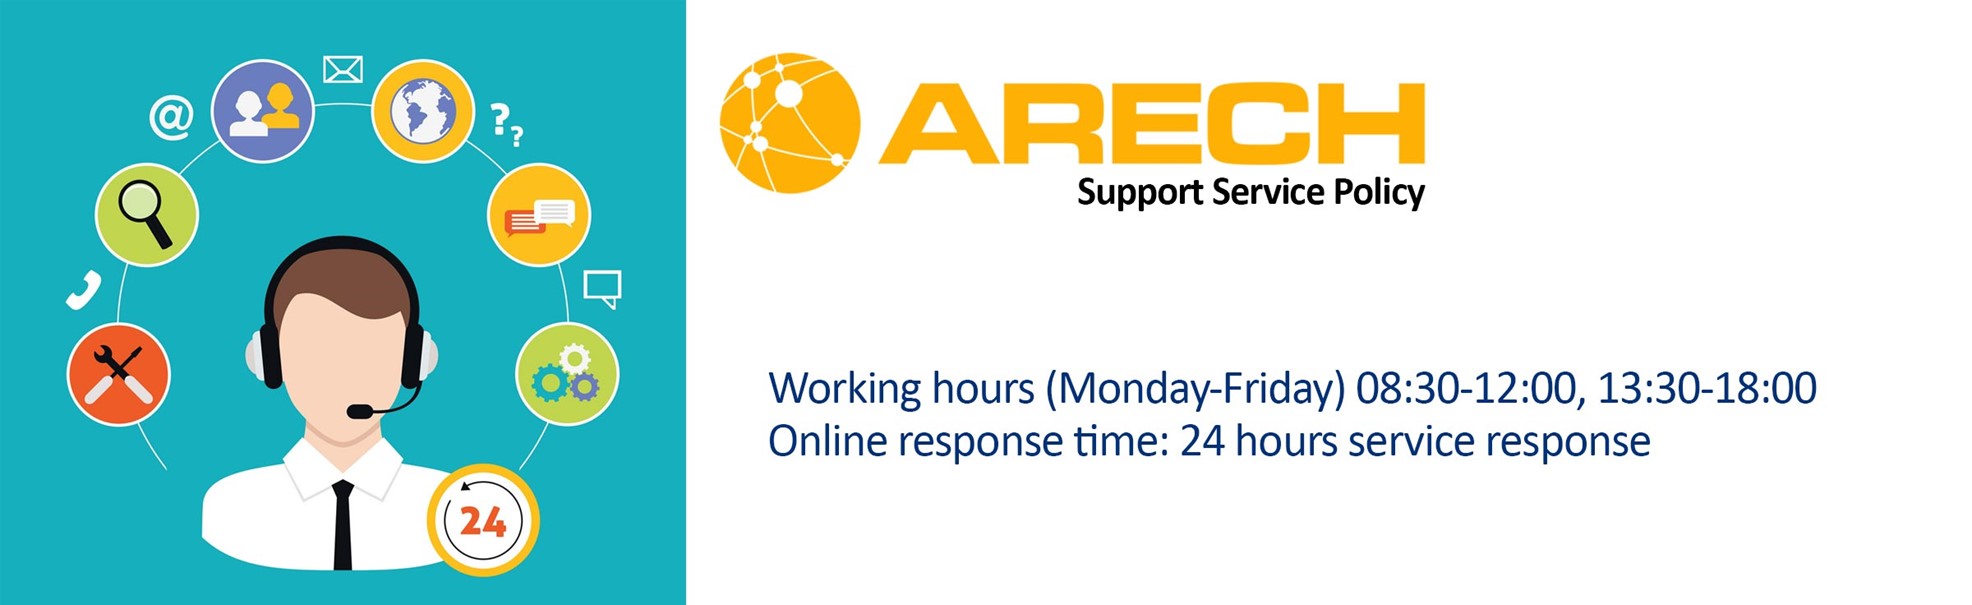 ARECH Support assistance